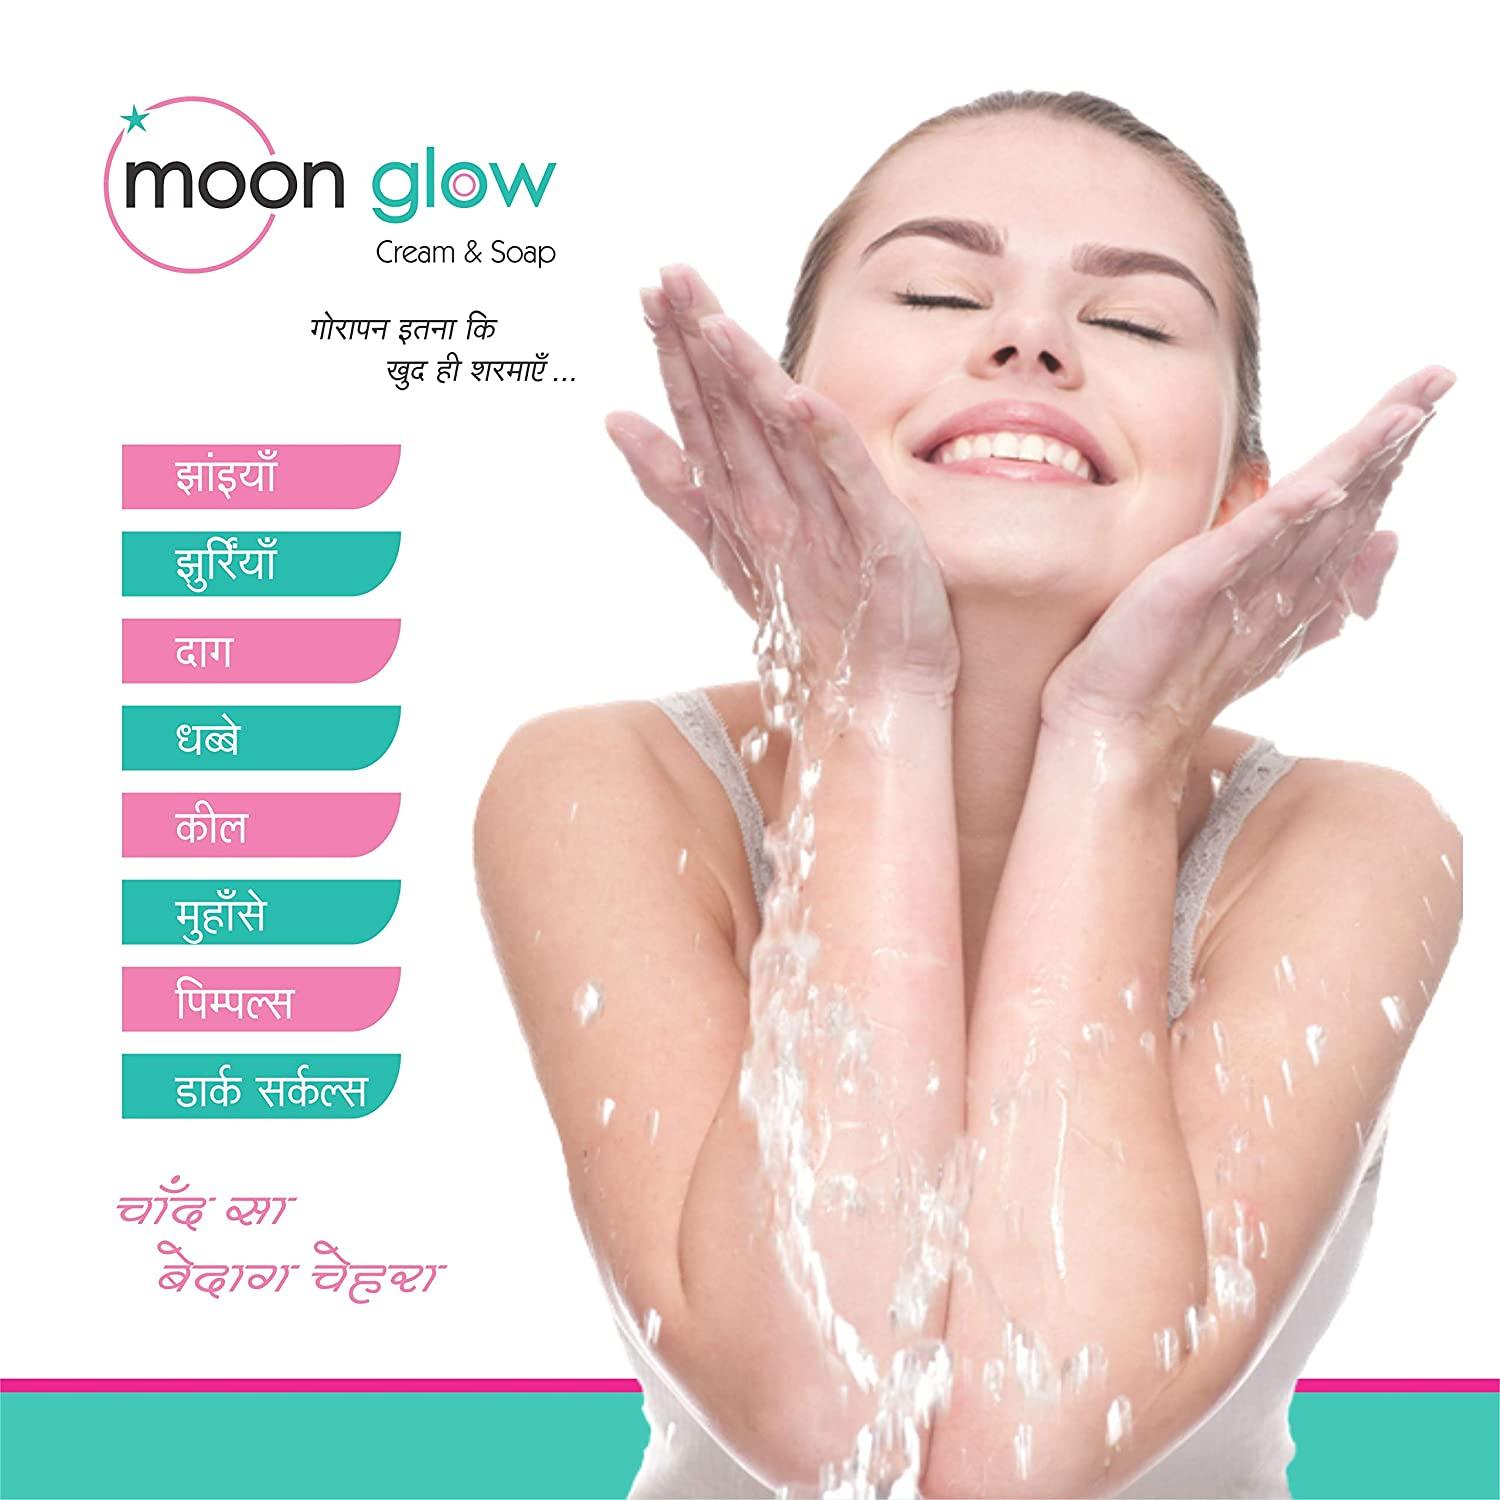 Moon Glow Cream & Soap for Acne, Pimples, Black Spots, Dark Circles, Stretch Marks, Anti-Aging and Fairness (2 Cream + 4 soap) - Olefia Biopharma Limited